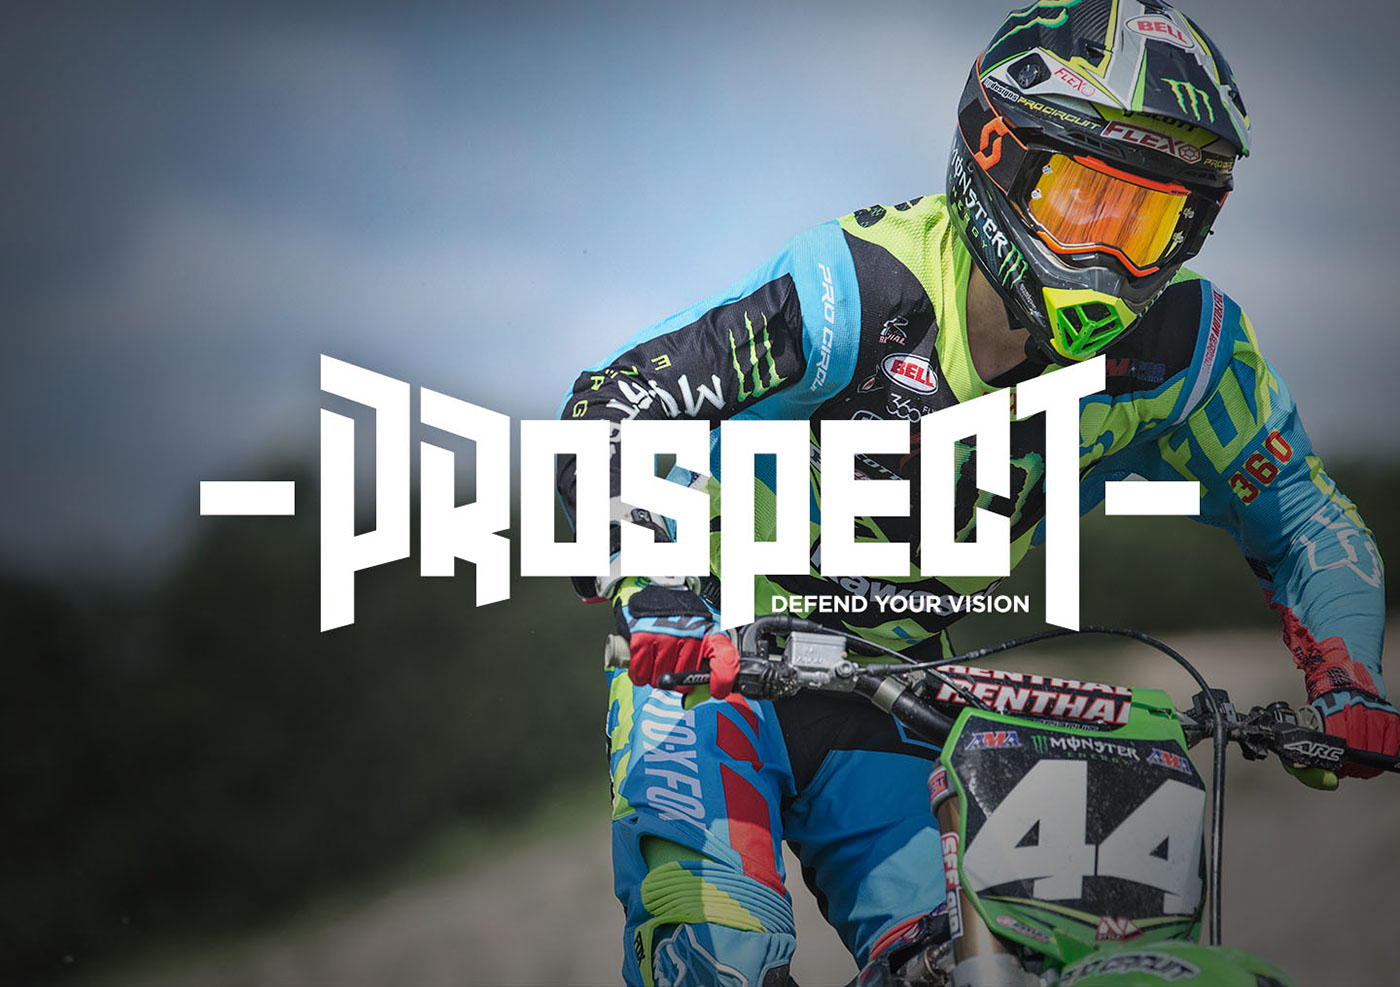 goggle action sports Motocross Advertising  release mx scott sports